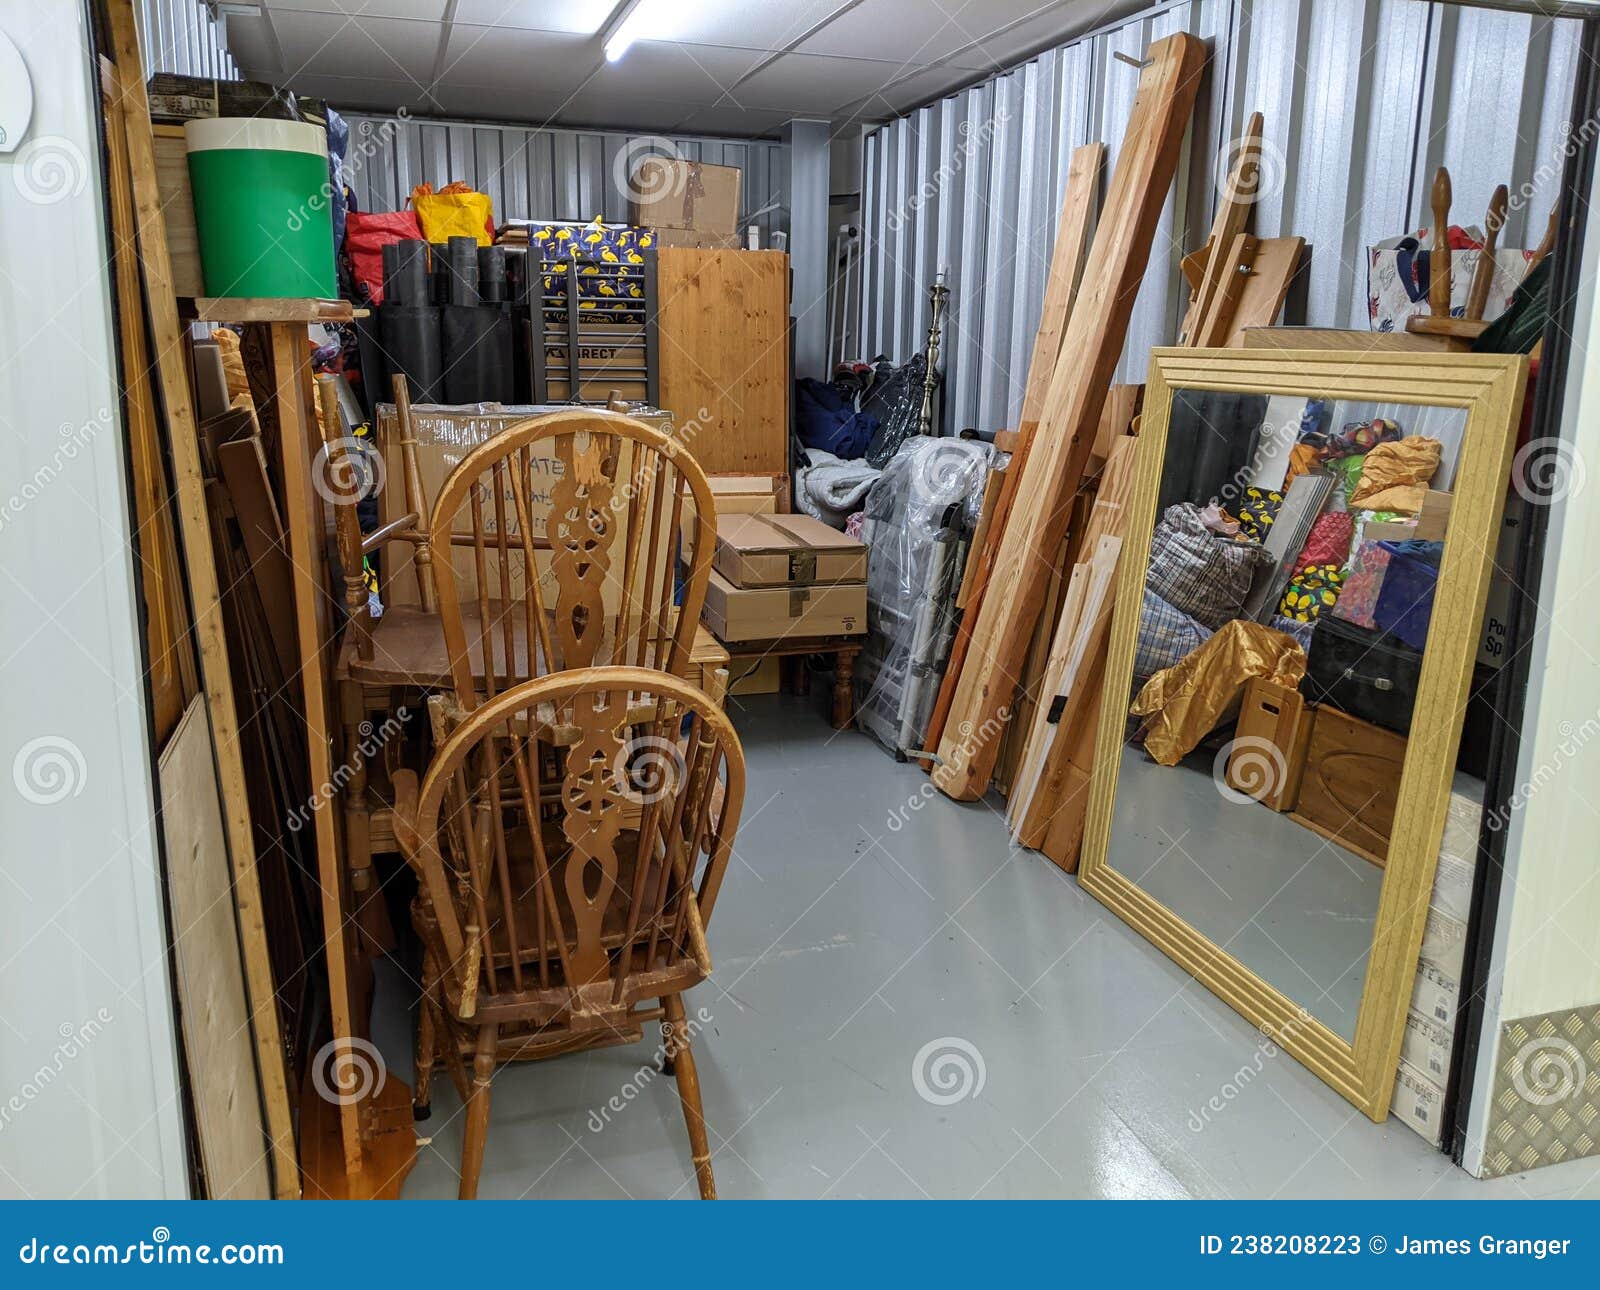 clearing a storage unit full with household furniture